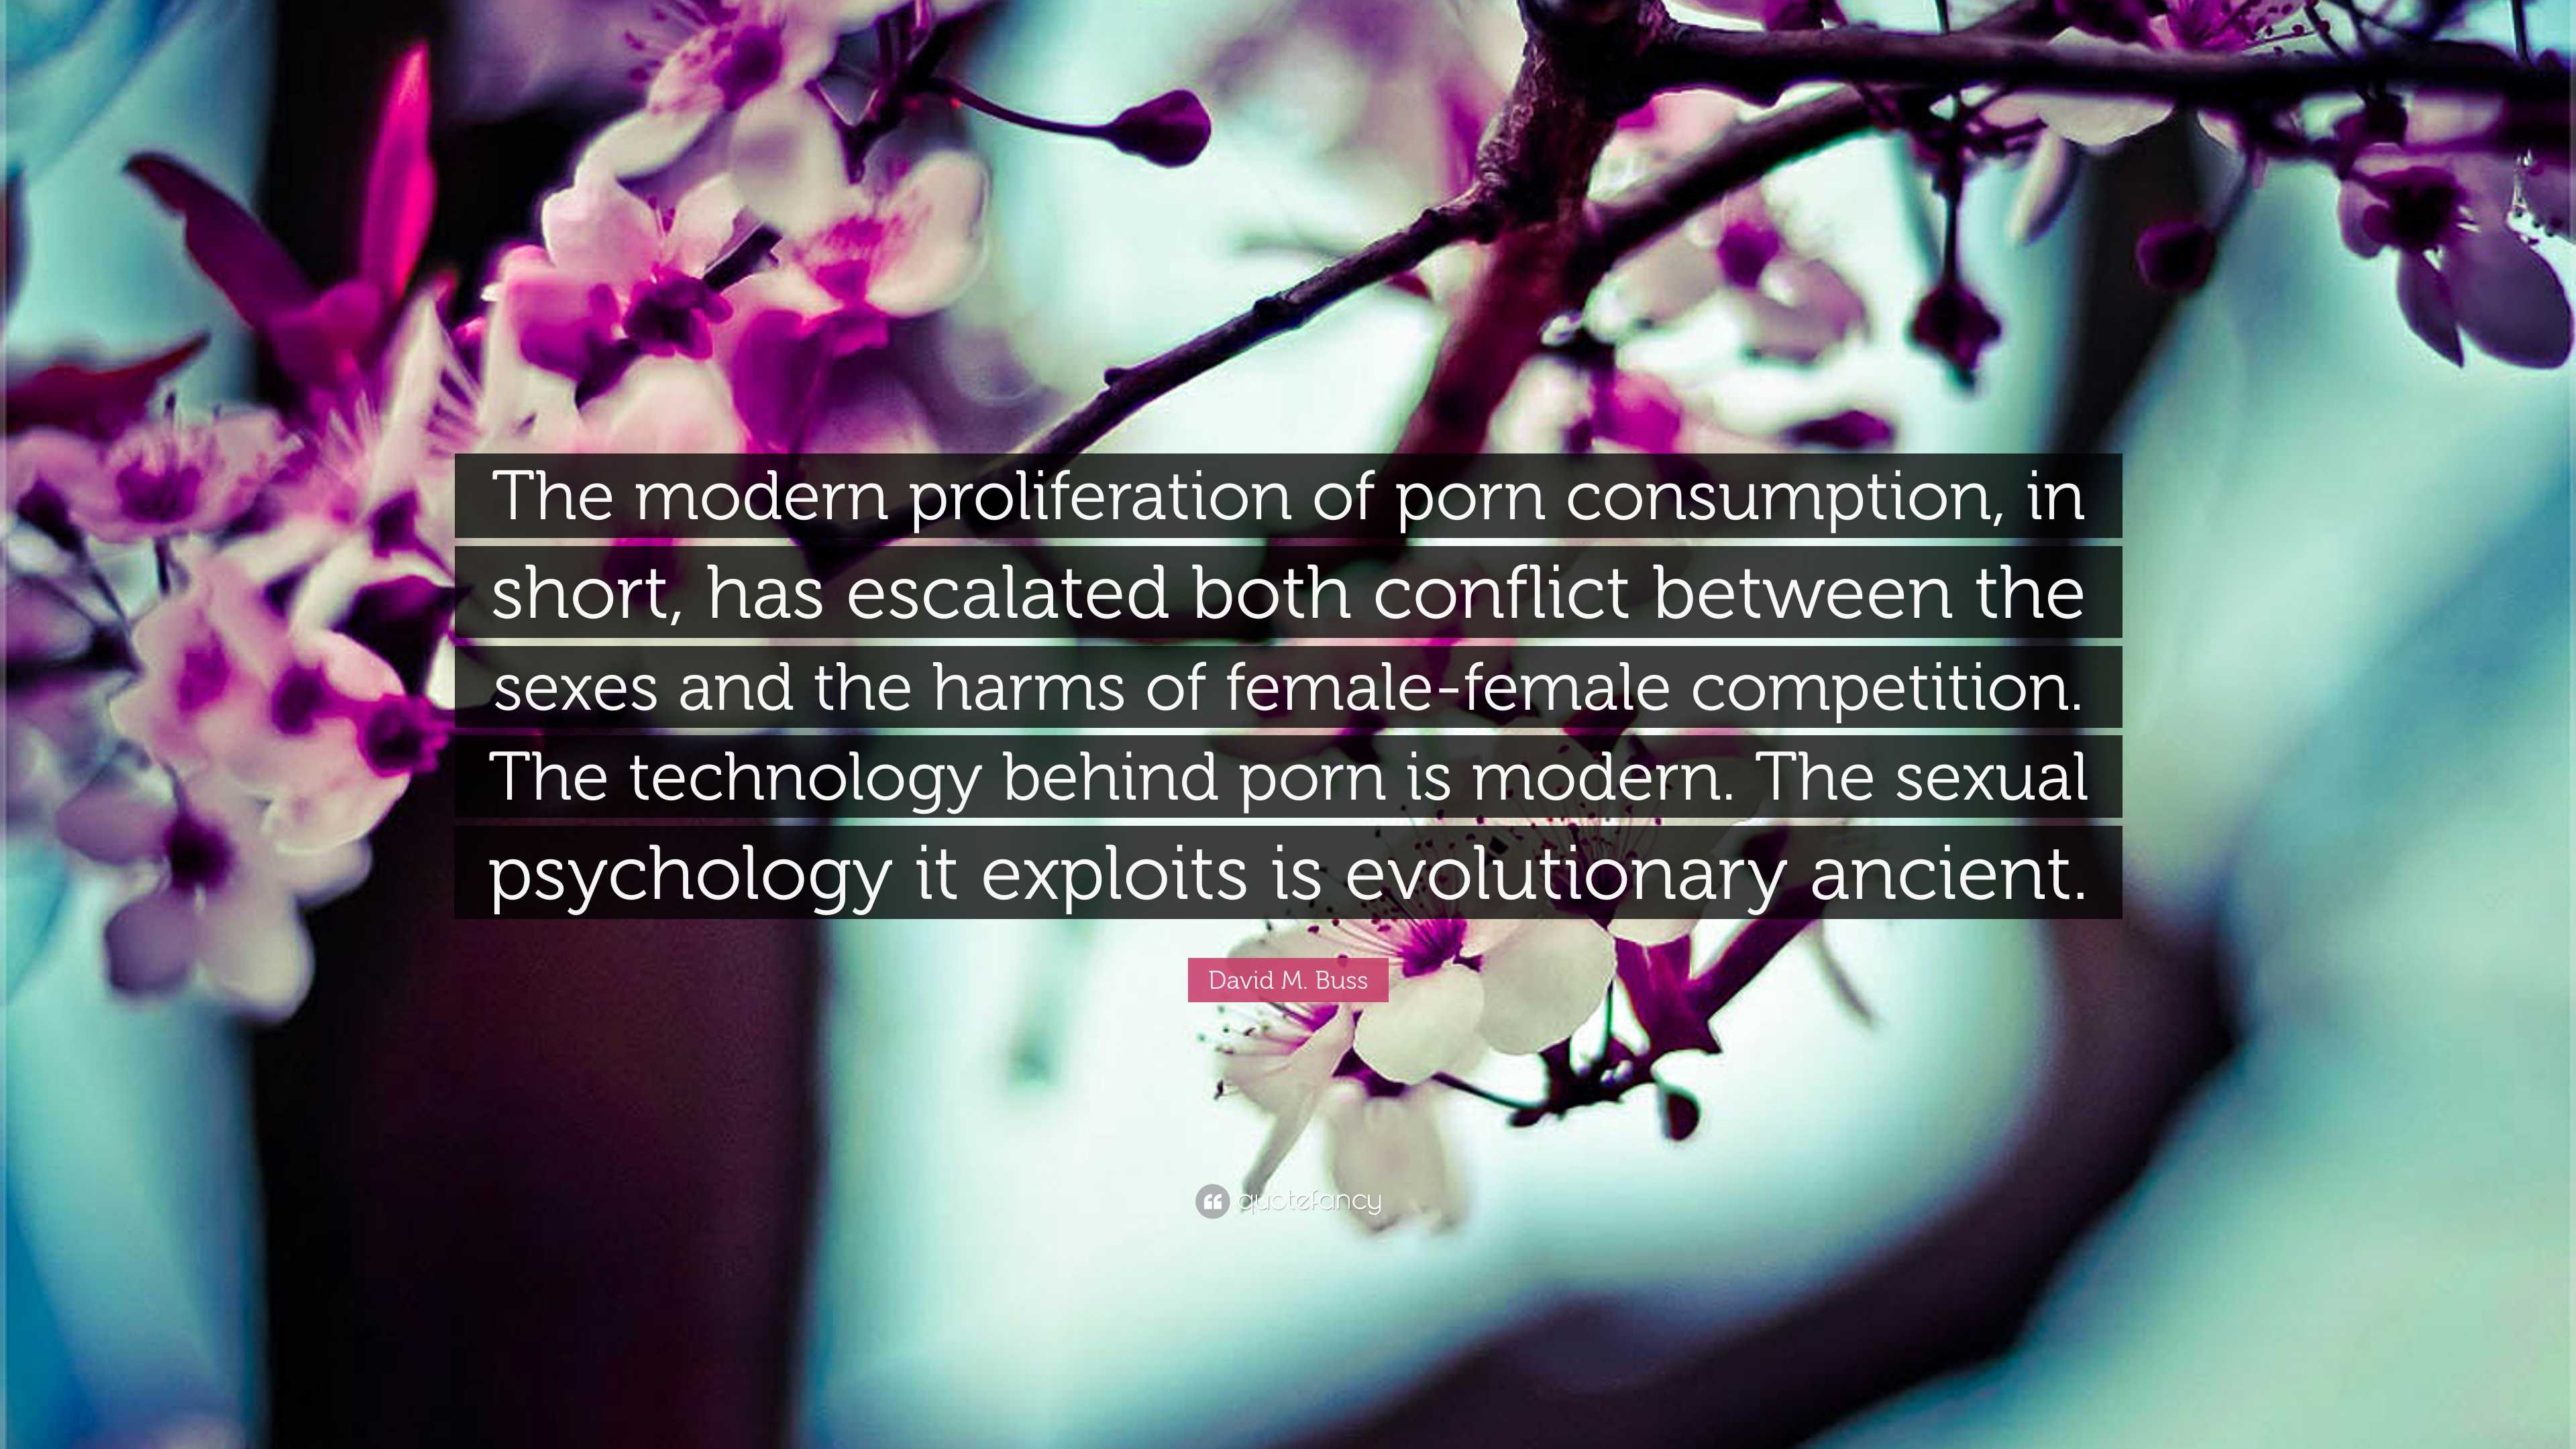 Sexesxxx - David M. Buss Quote: â€œThe modern proliferation of porn consumption, in  short, has escalated both conflict between the sexes and the harms of f...â€